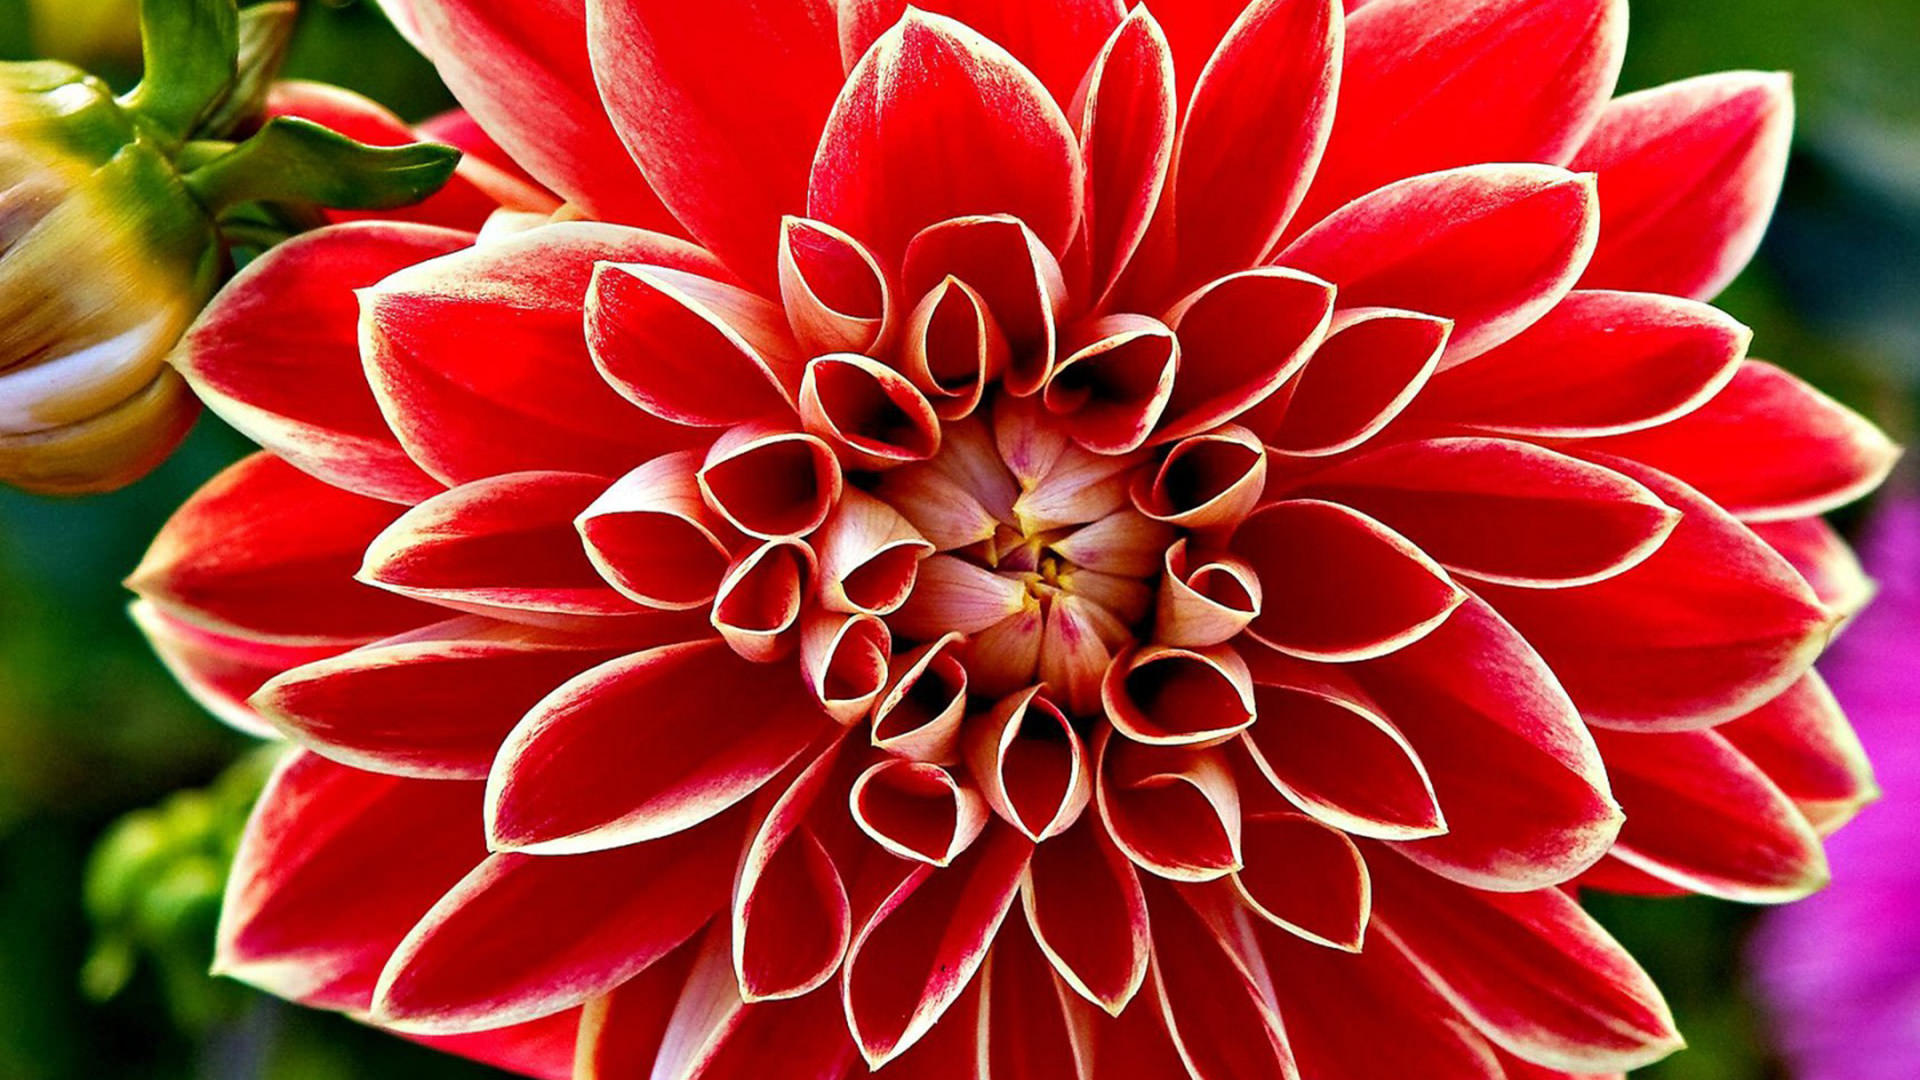 Red Flower Background For Download